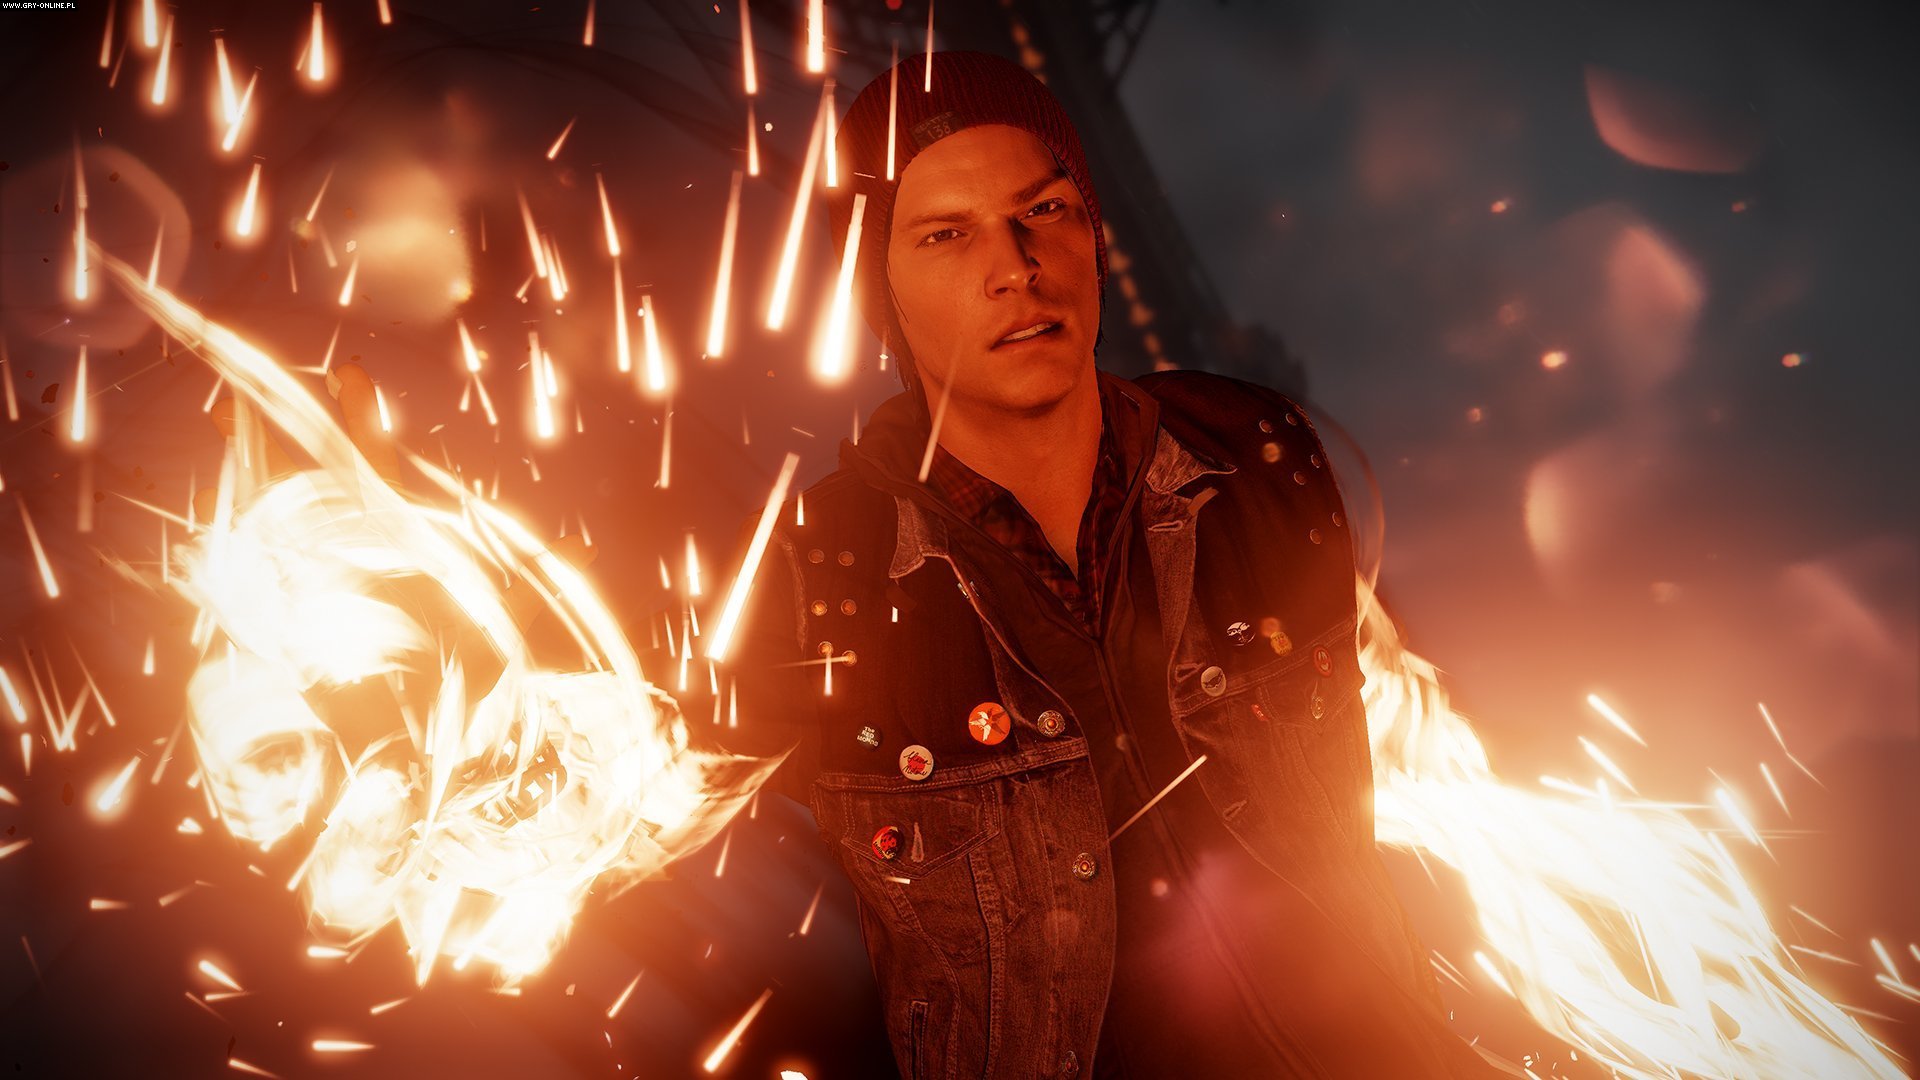 Best InFAMOUS: Second Son wallpaper ID:270091 for High Resolution 1080p desktop